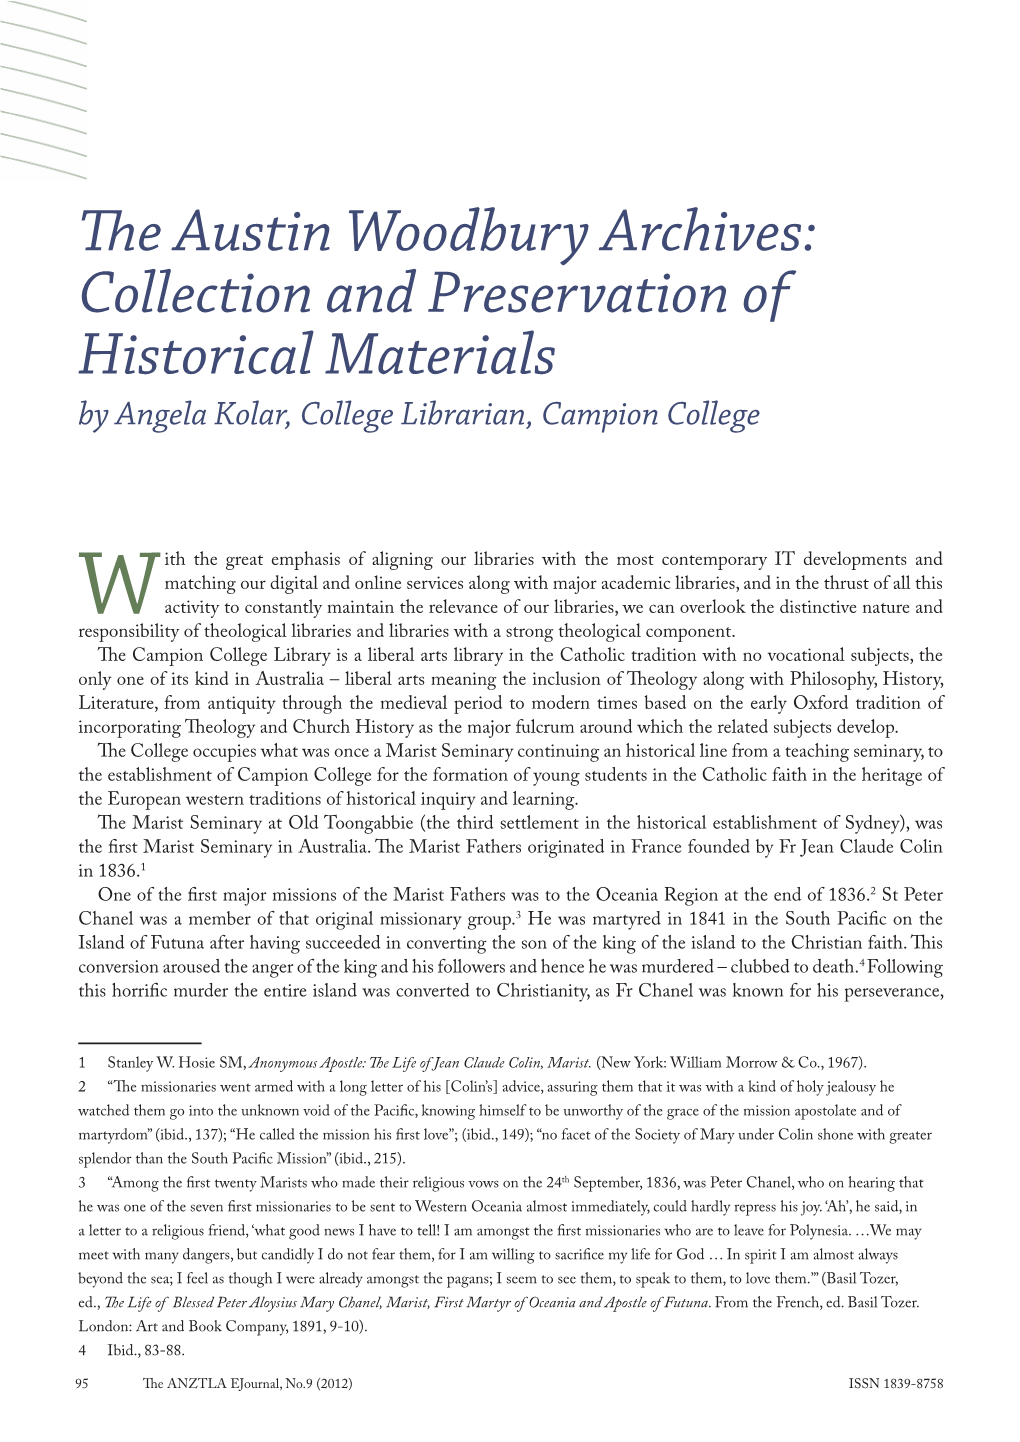 The Austin Woodbury Archives